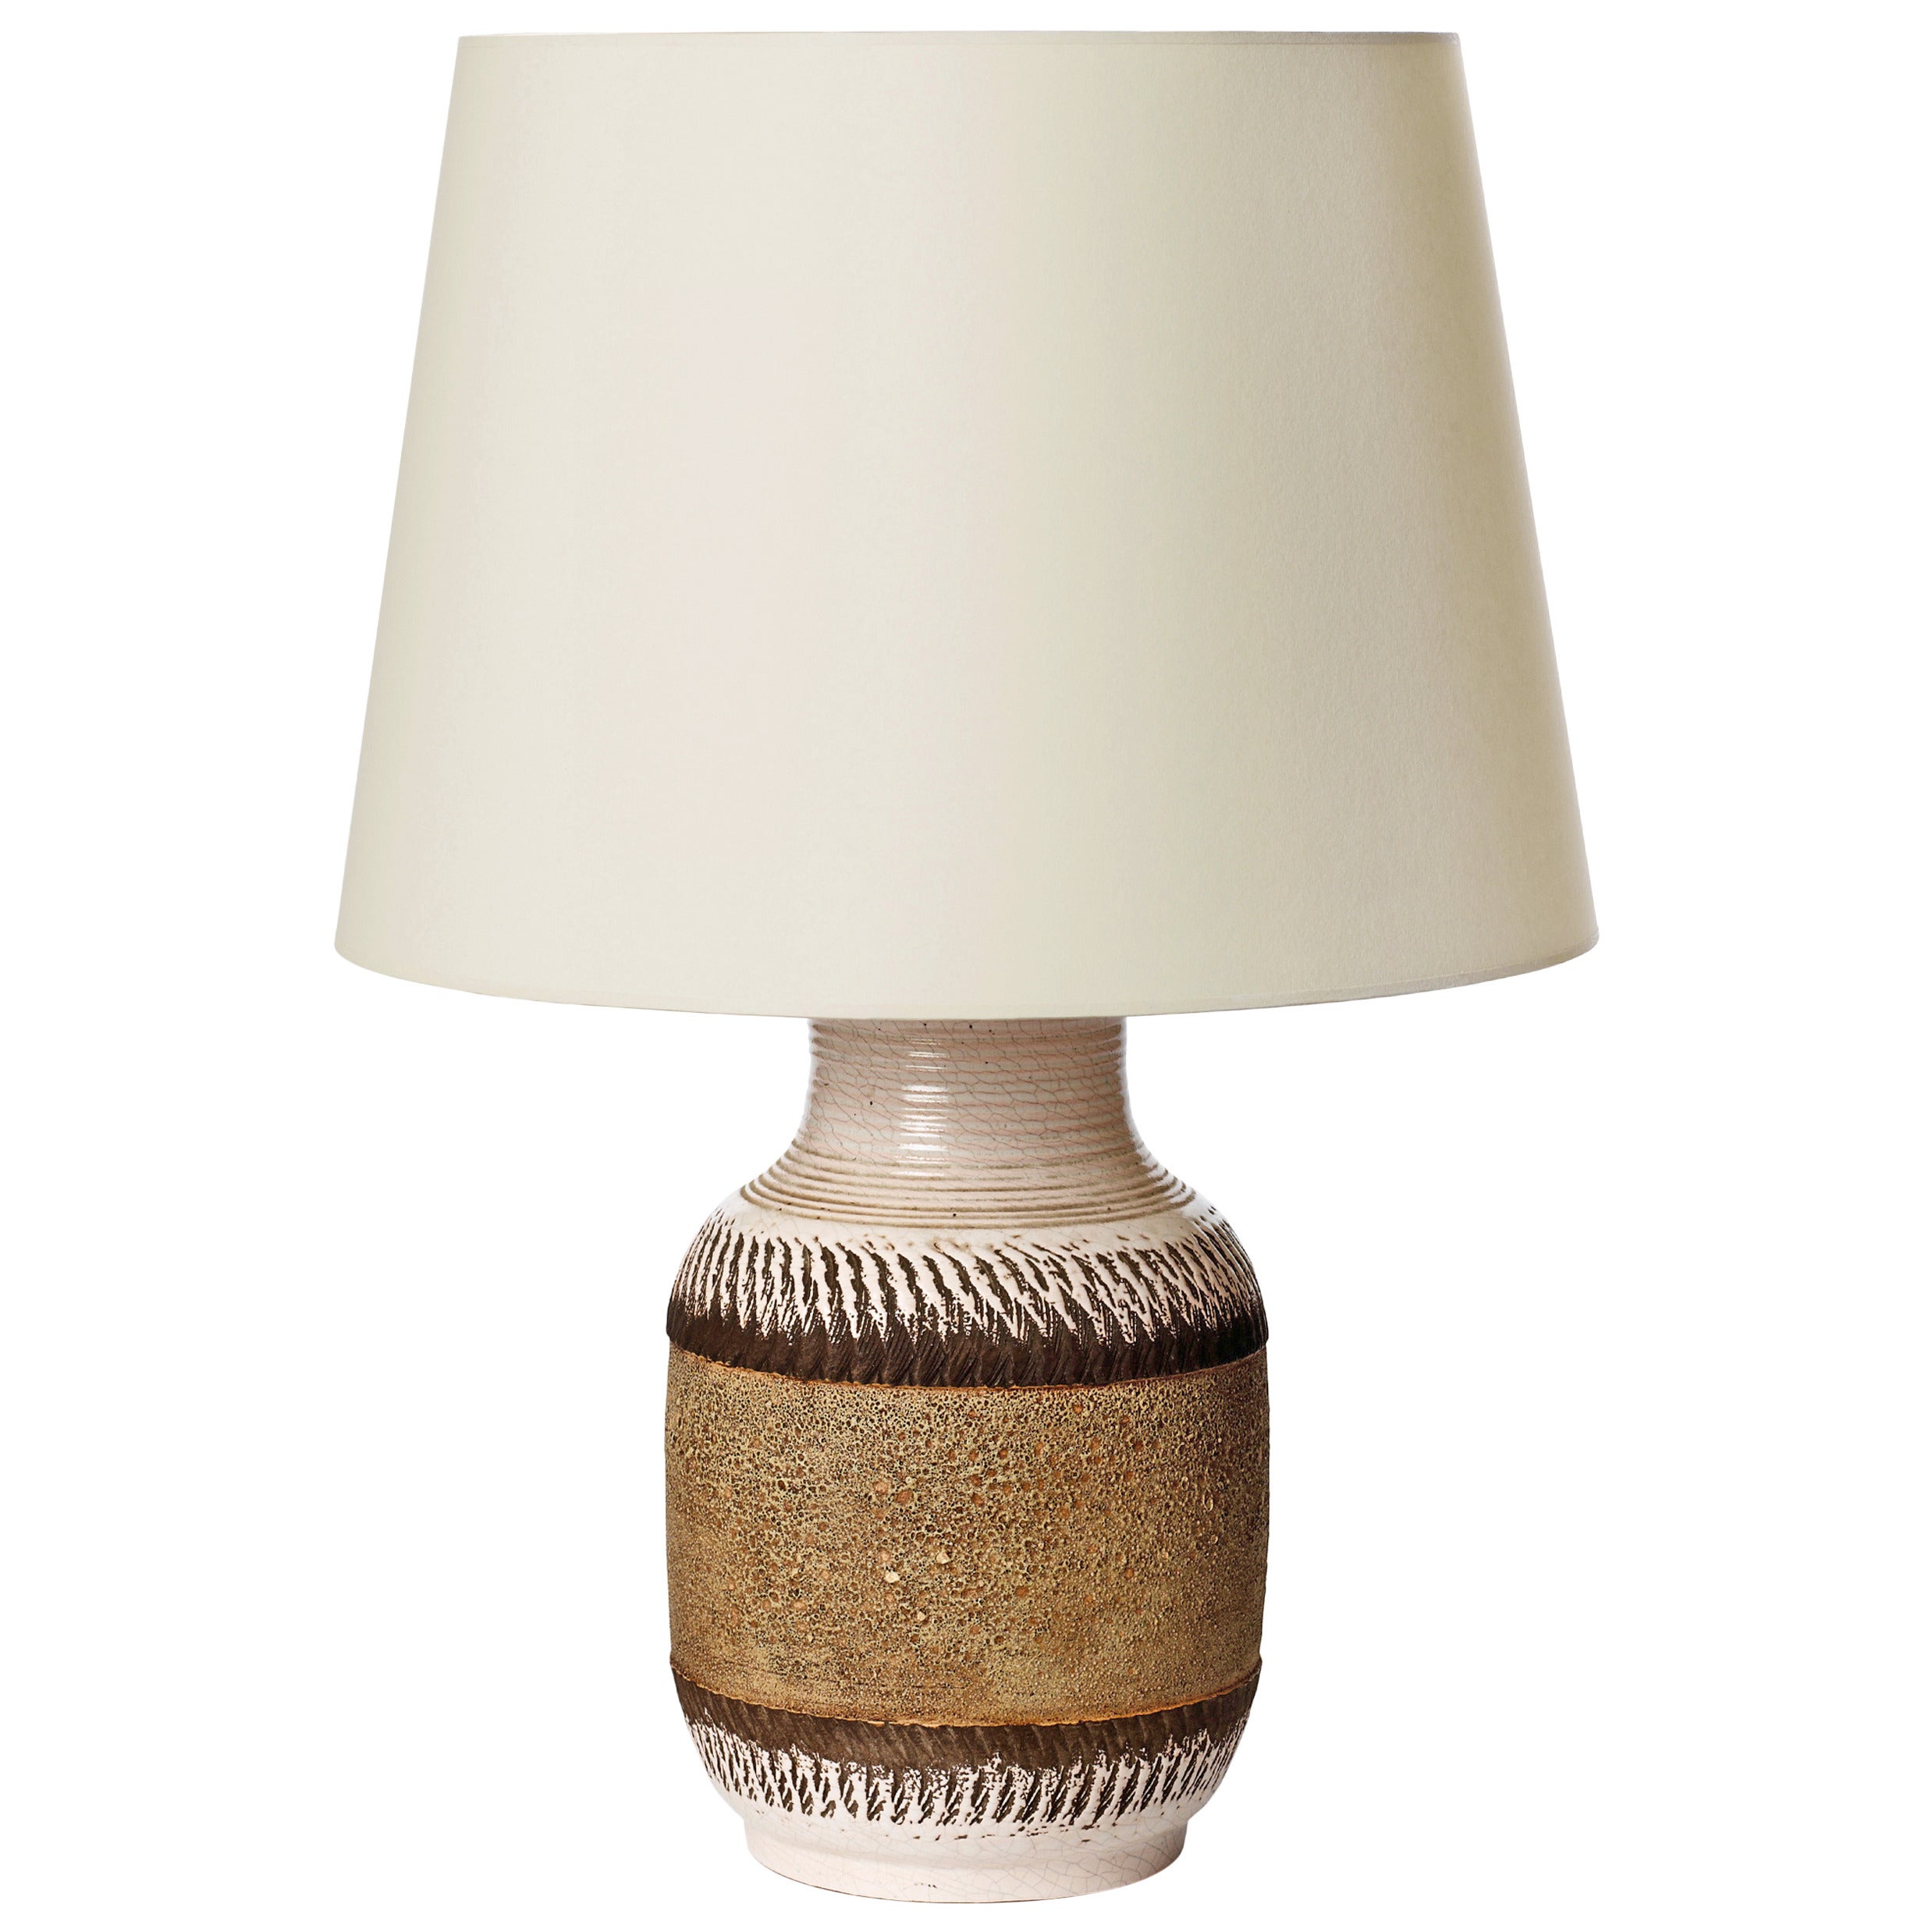 Albarello-Shaped Table Lamp with Textured Banding by Keramos For Sale